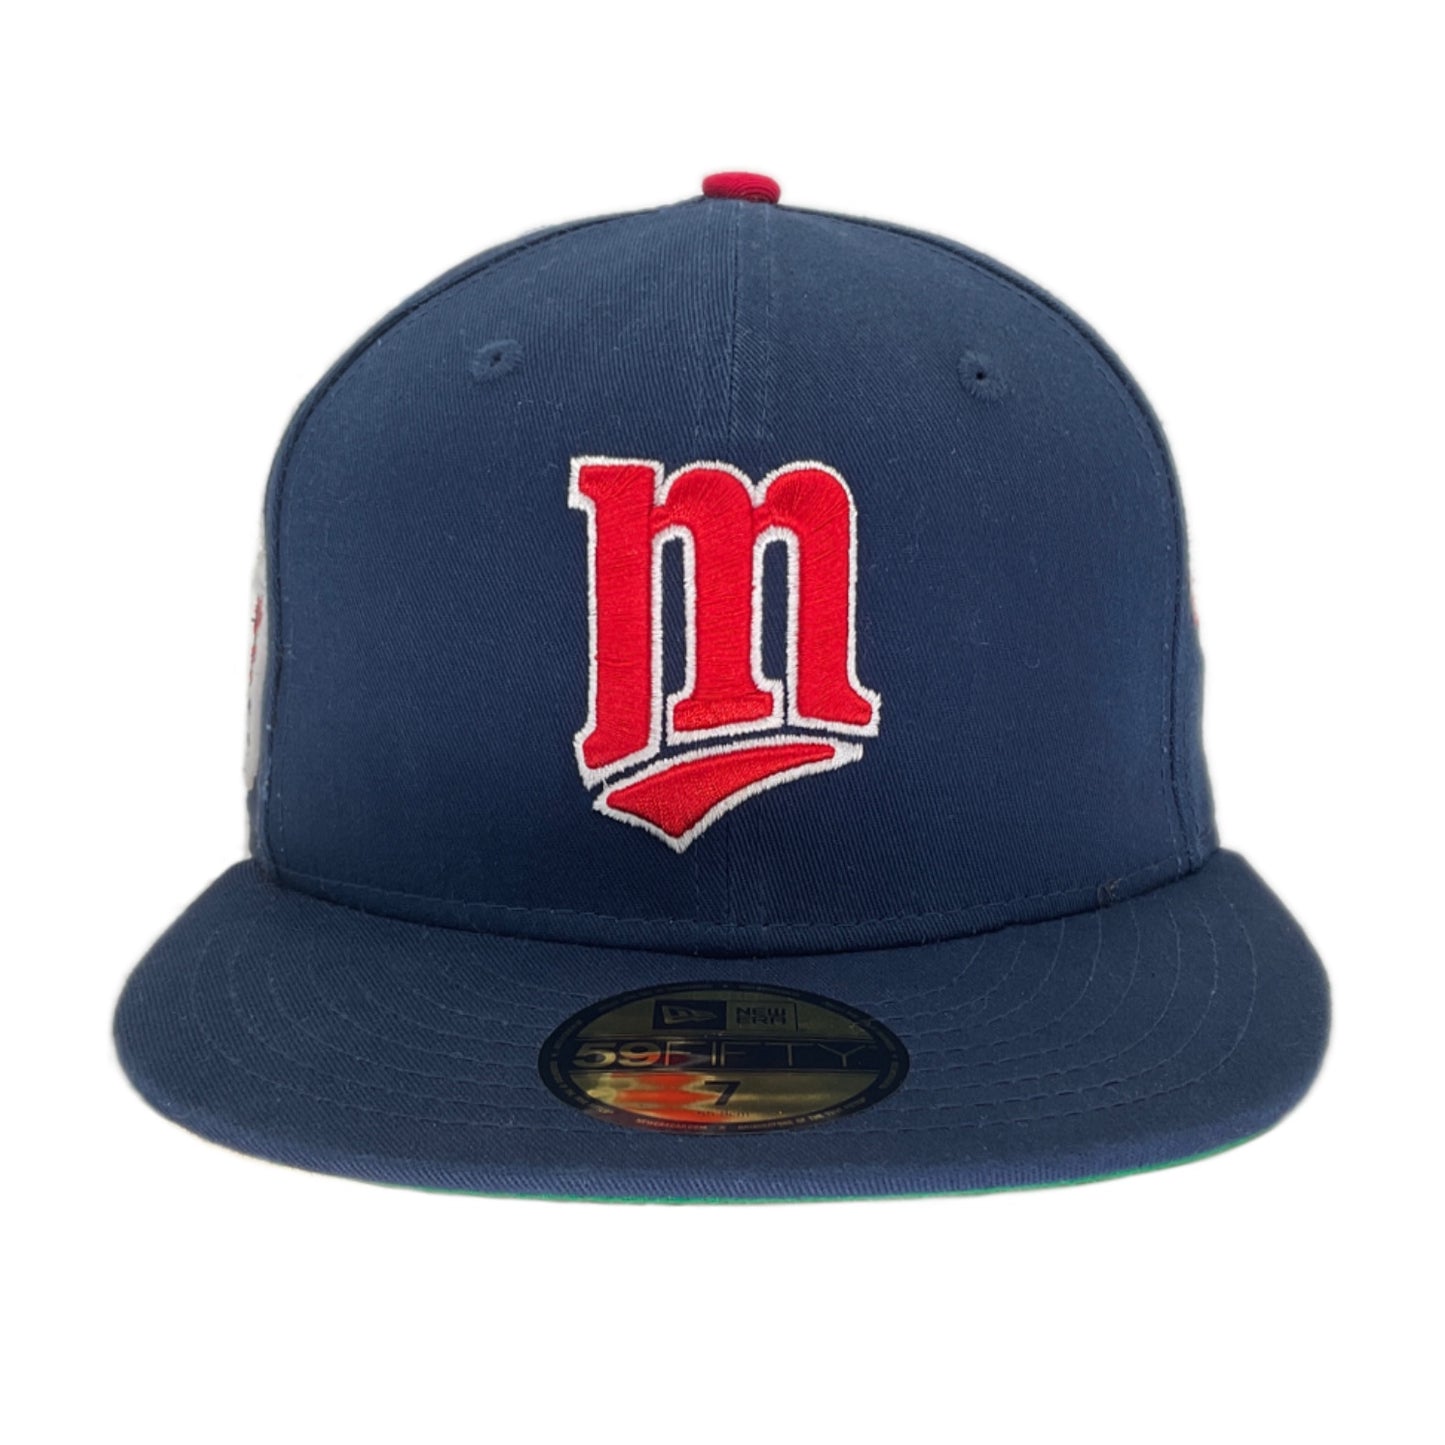 Minnesota Twins Cooperstown Patches New Era Cap Navy